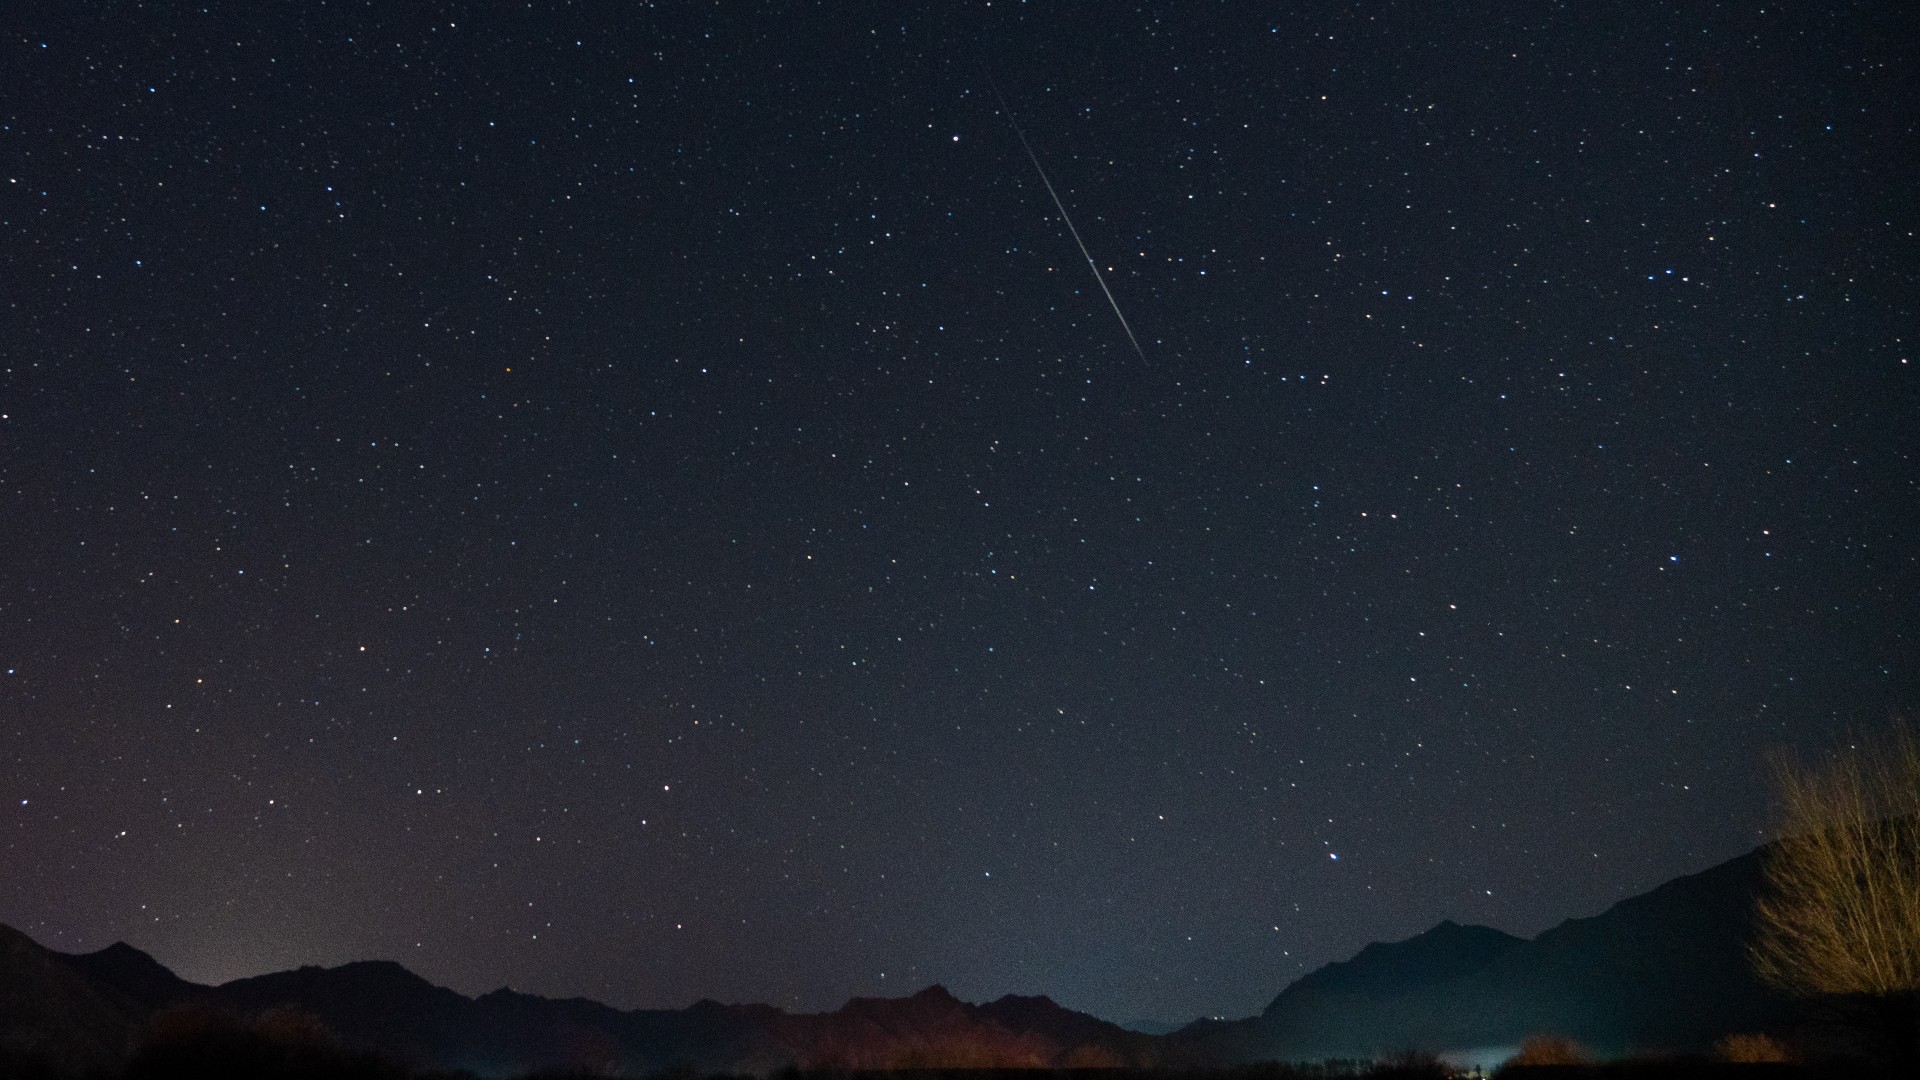 Ursid meteor shower shines with ideal dark sky conditions this year